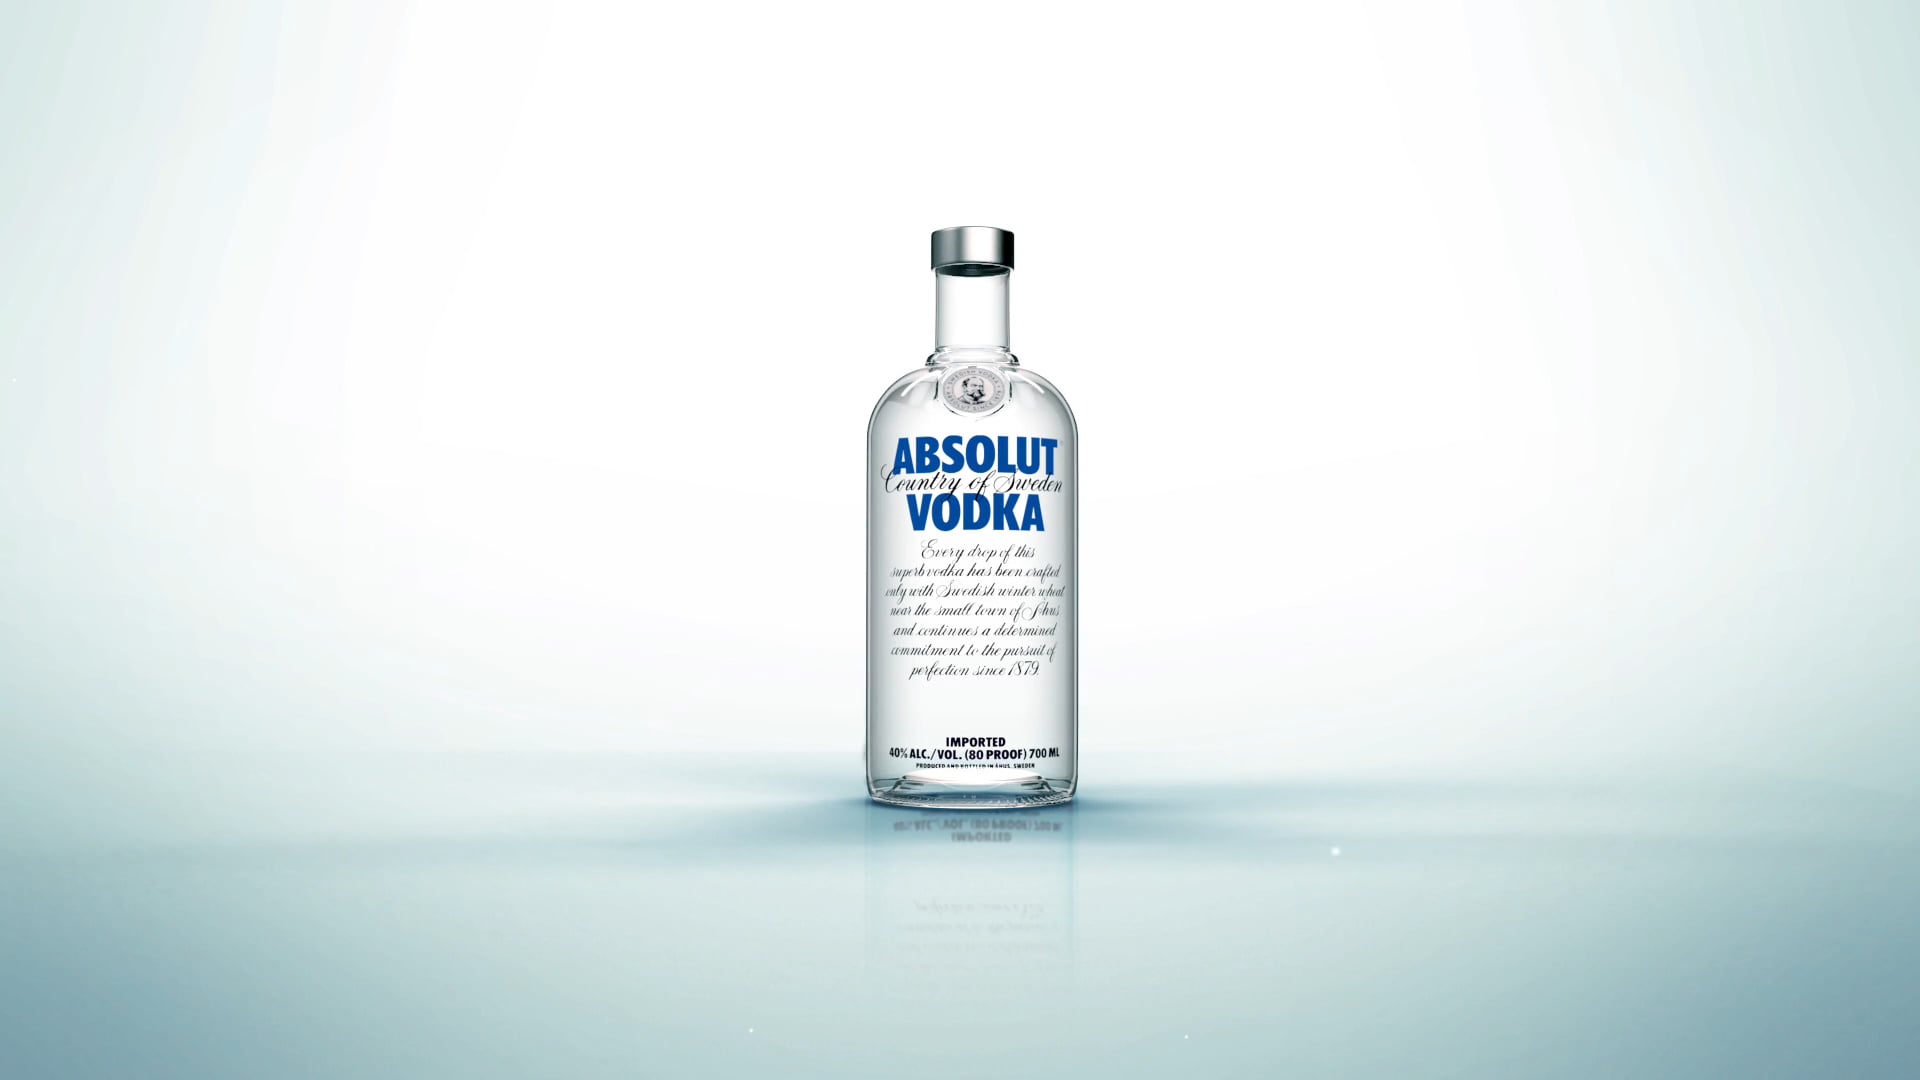 "FY'16" for Absolut